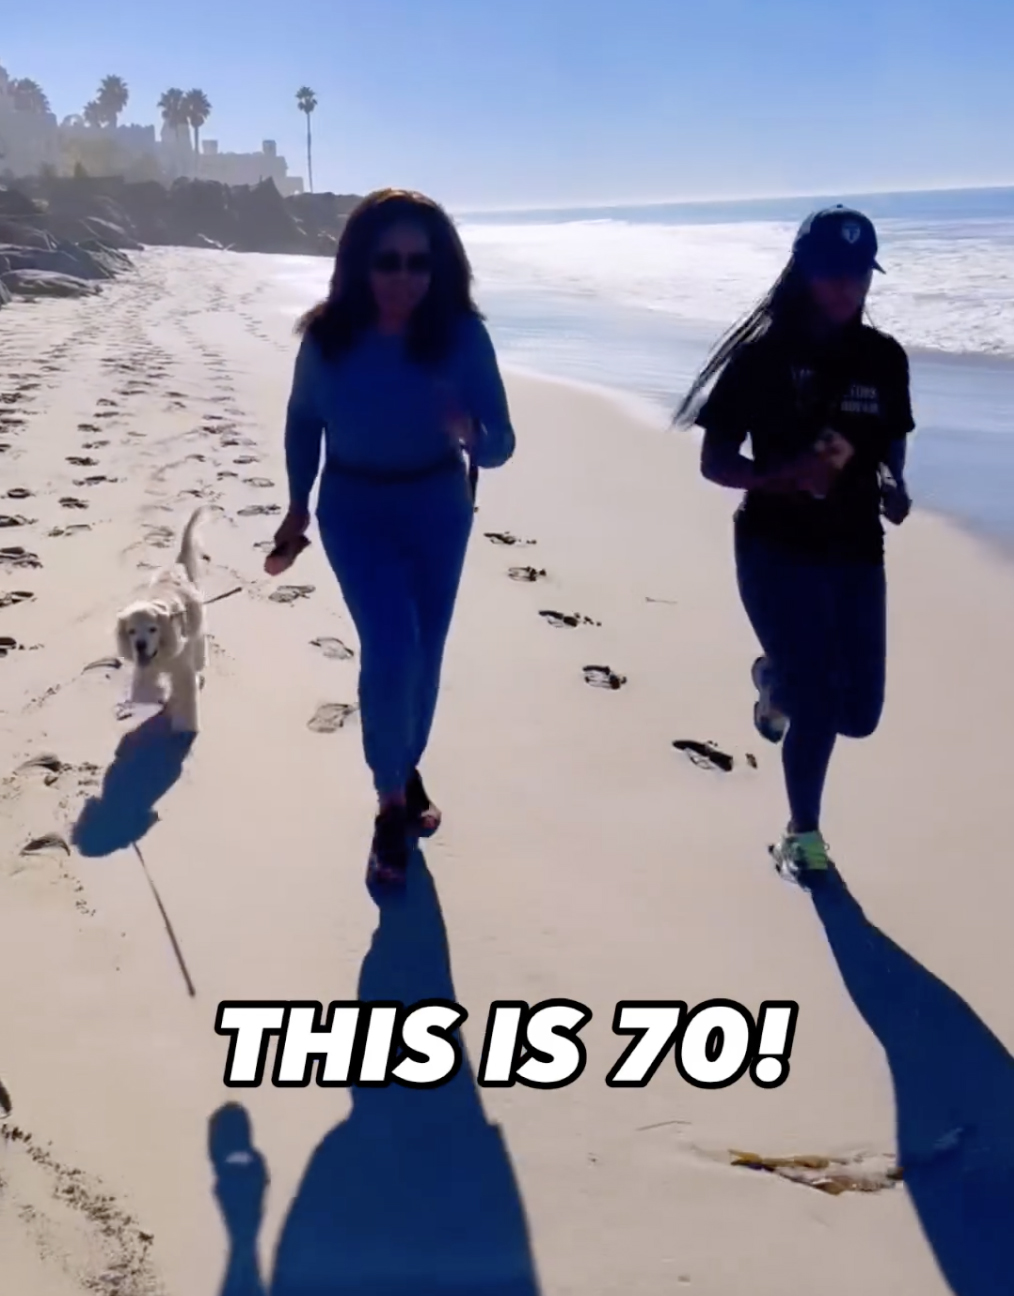 Oprah Winfrey celebrates 70th birthday running on the beach after using Ozempic to lose weight